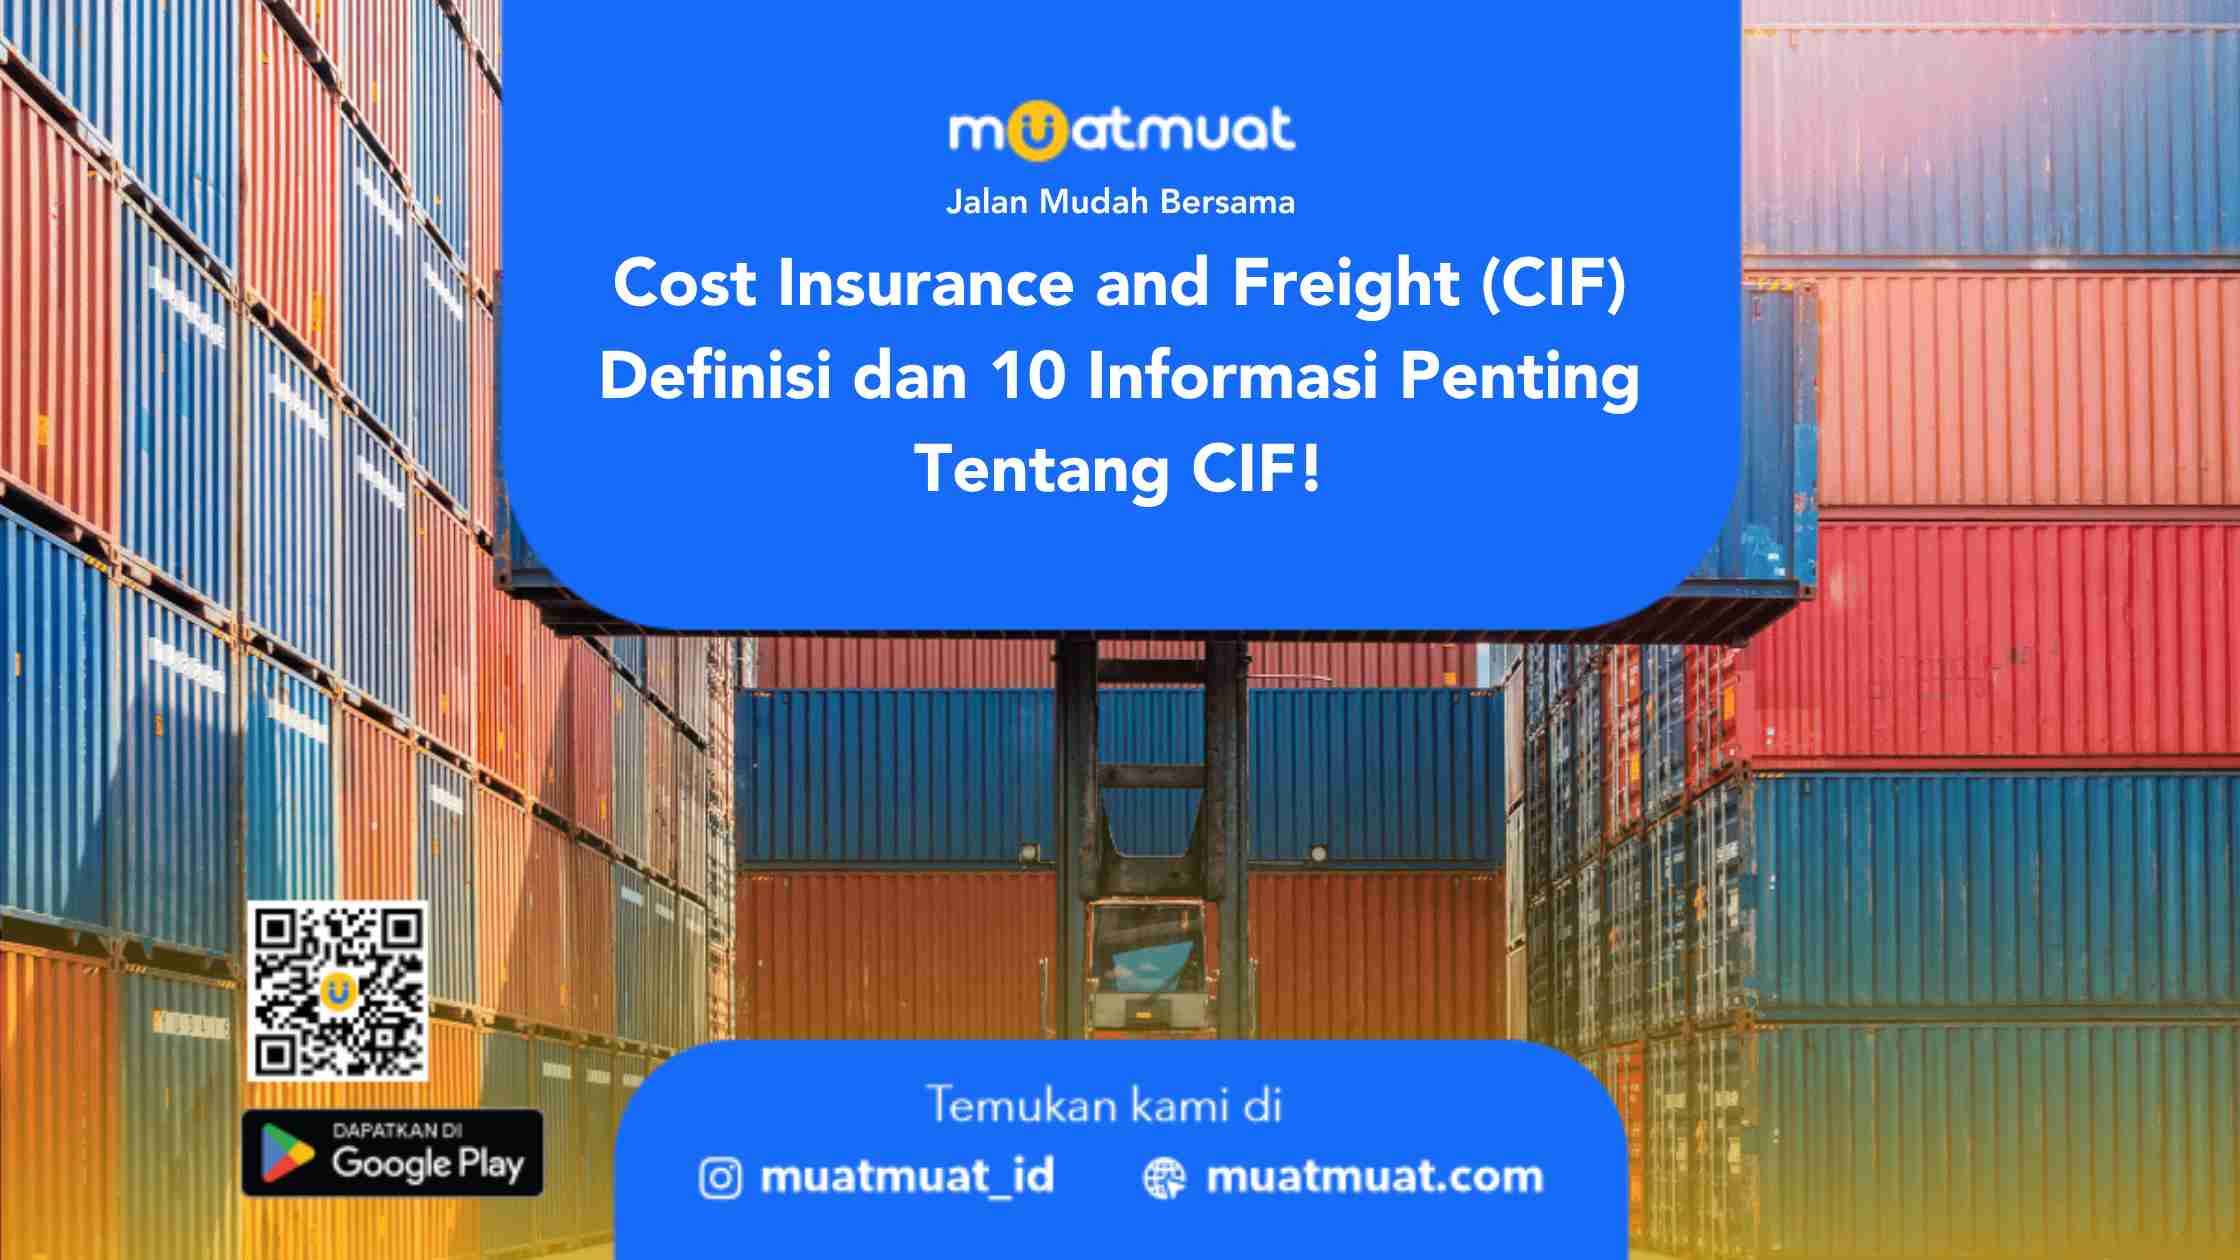 Cost Insurance and Freight